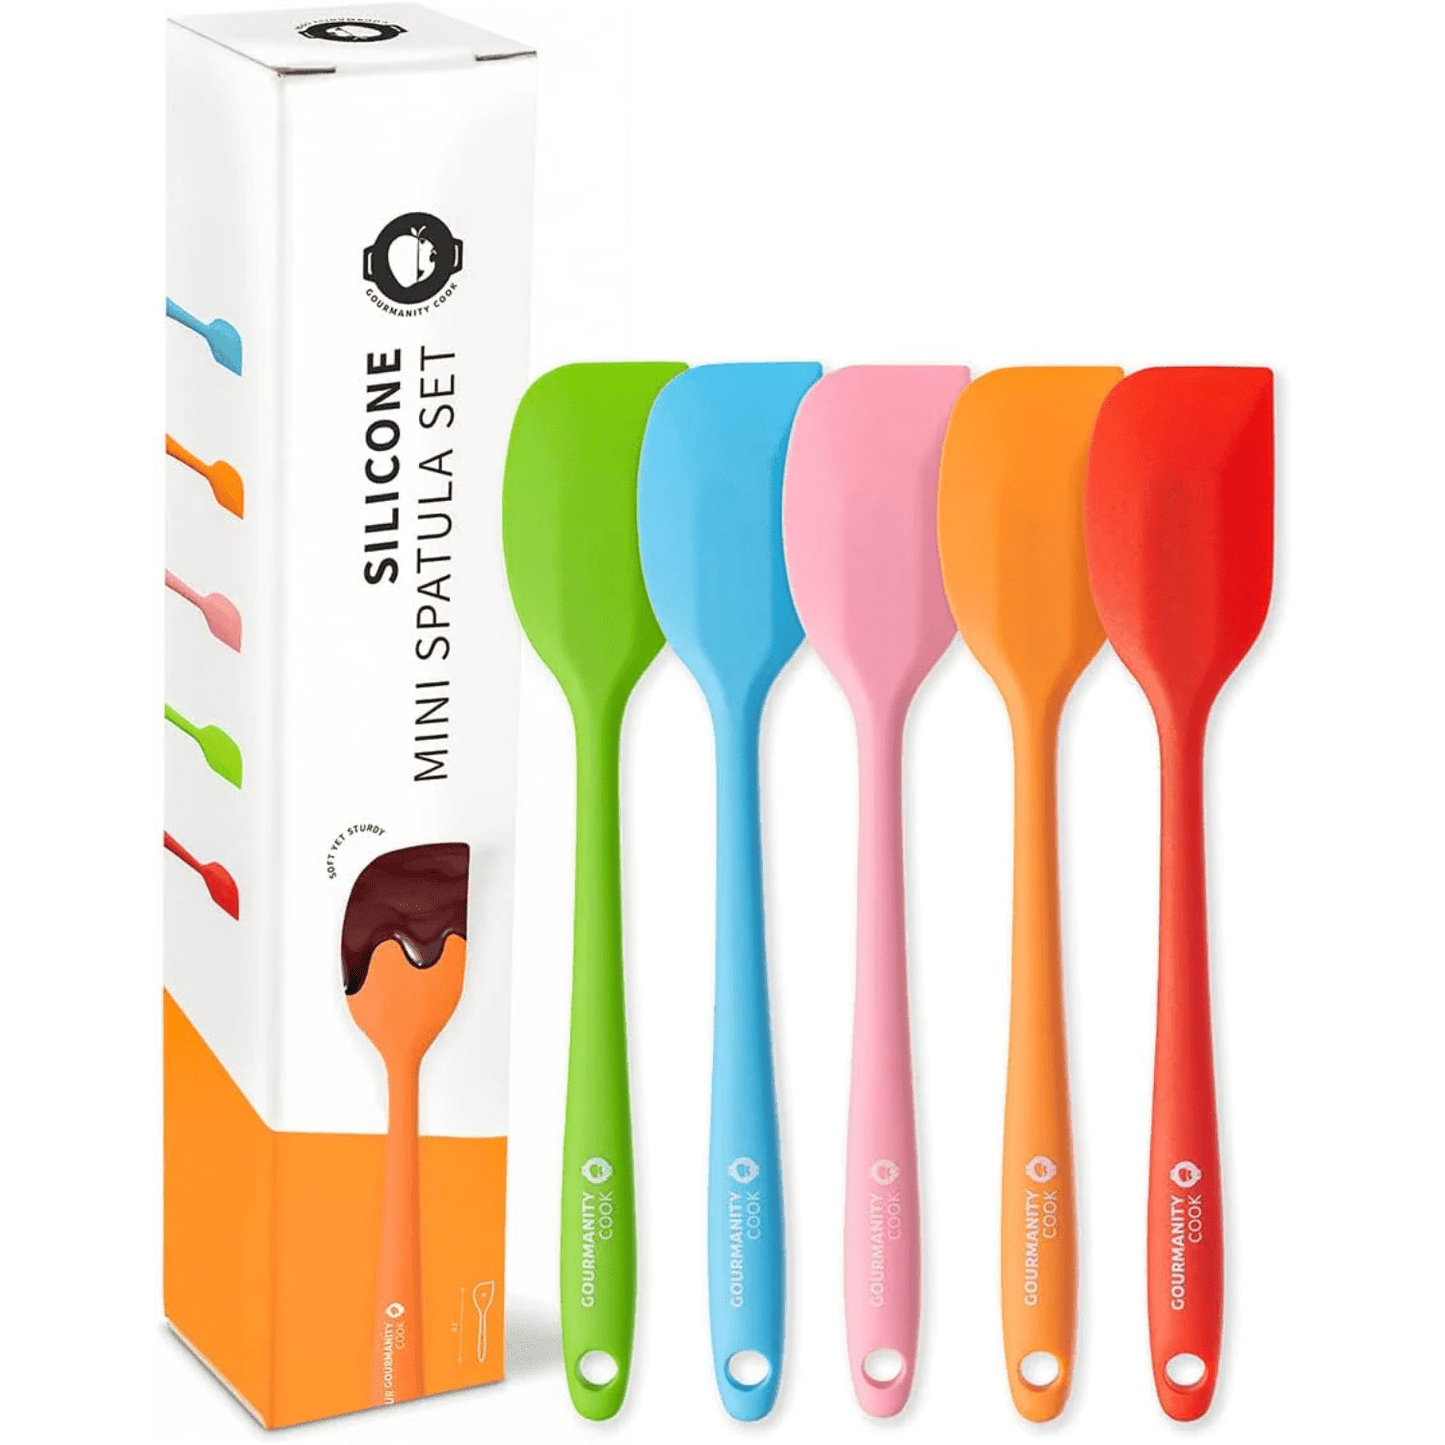 Gourmanity Cook Small Silicone Spatulas Set of 5 - Gourmanity